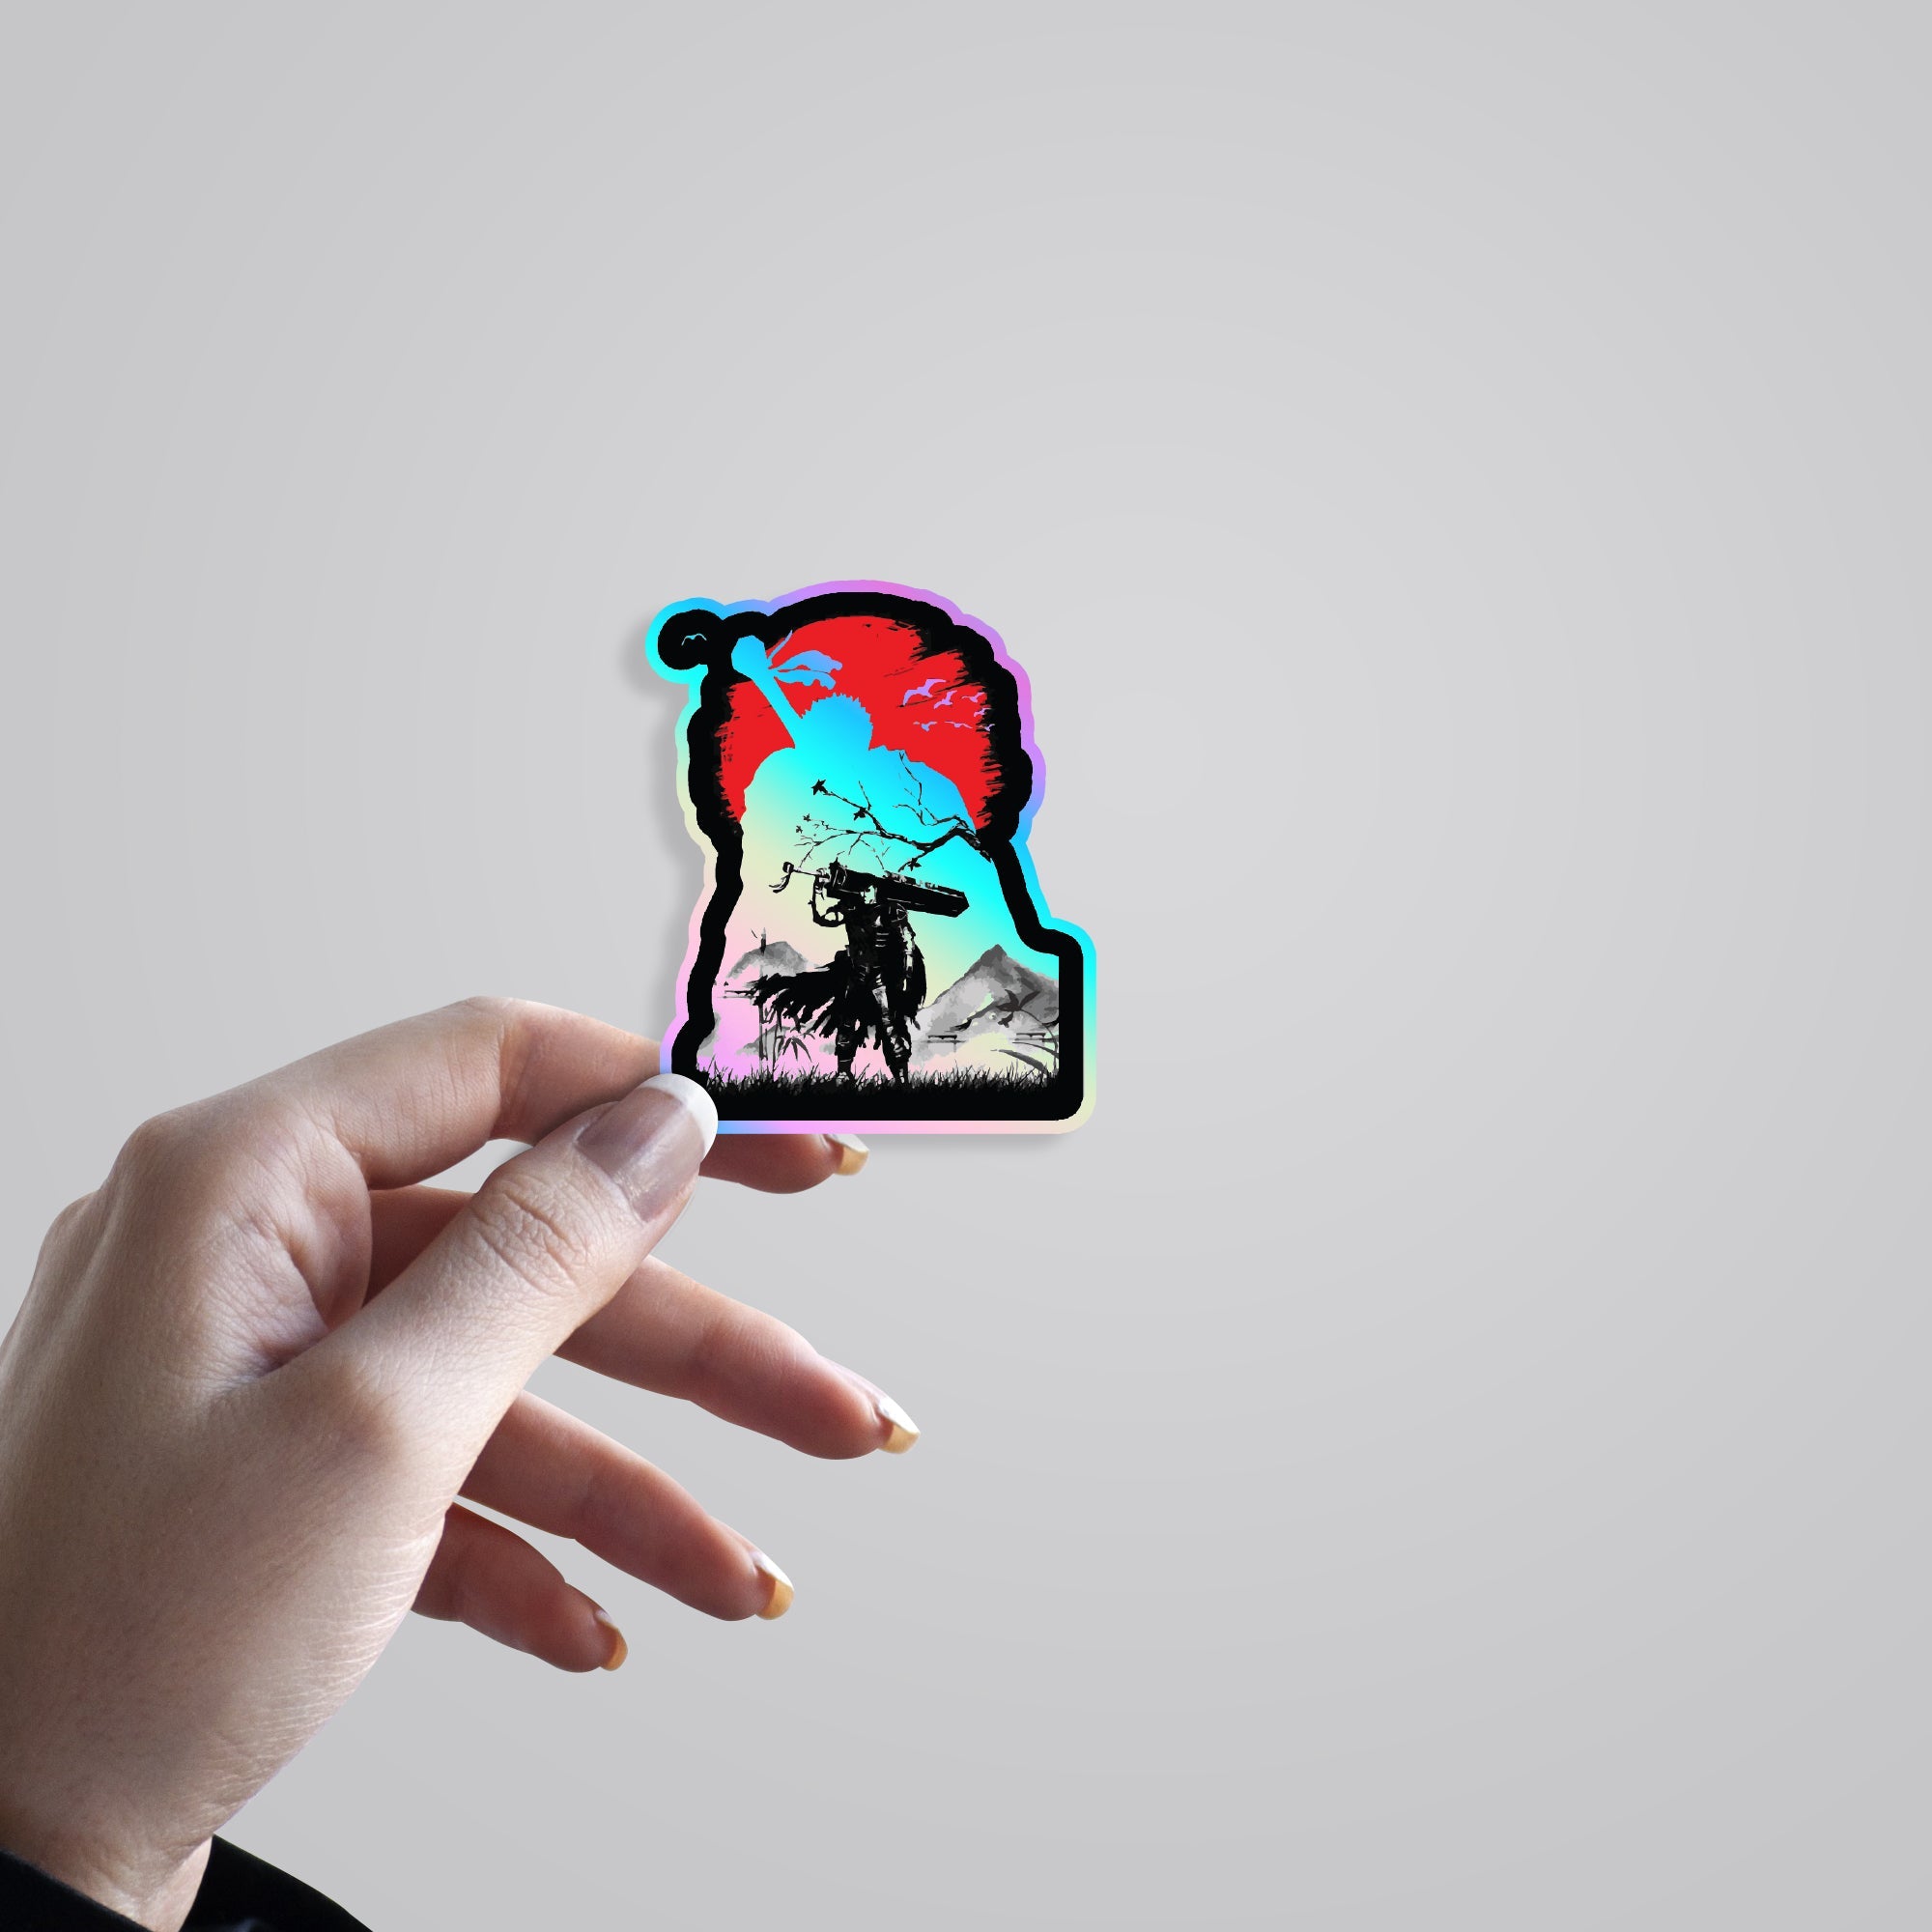 Guts Silhouette Holographic Stickers